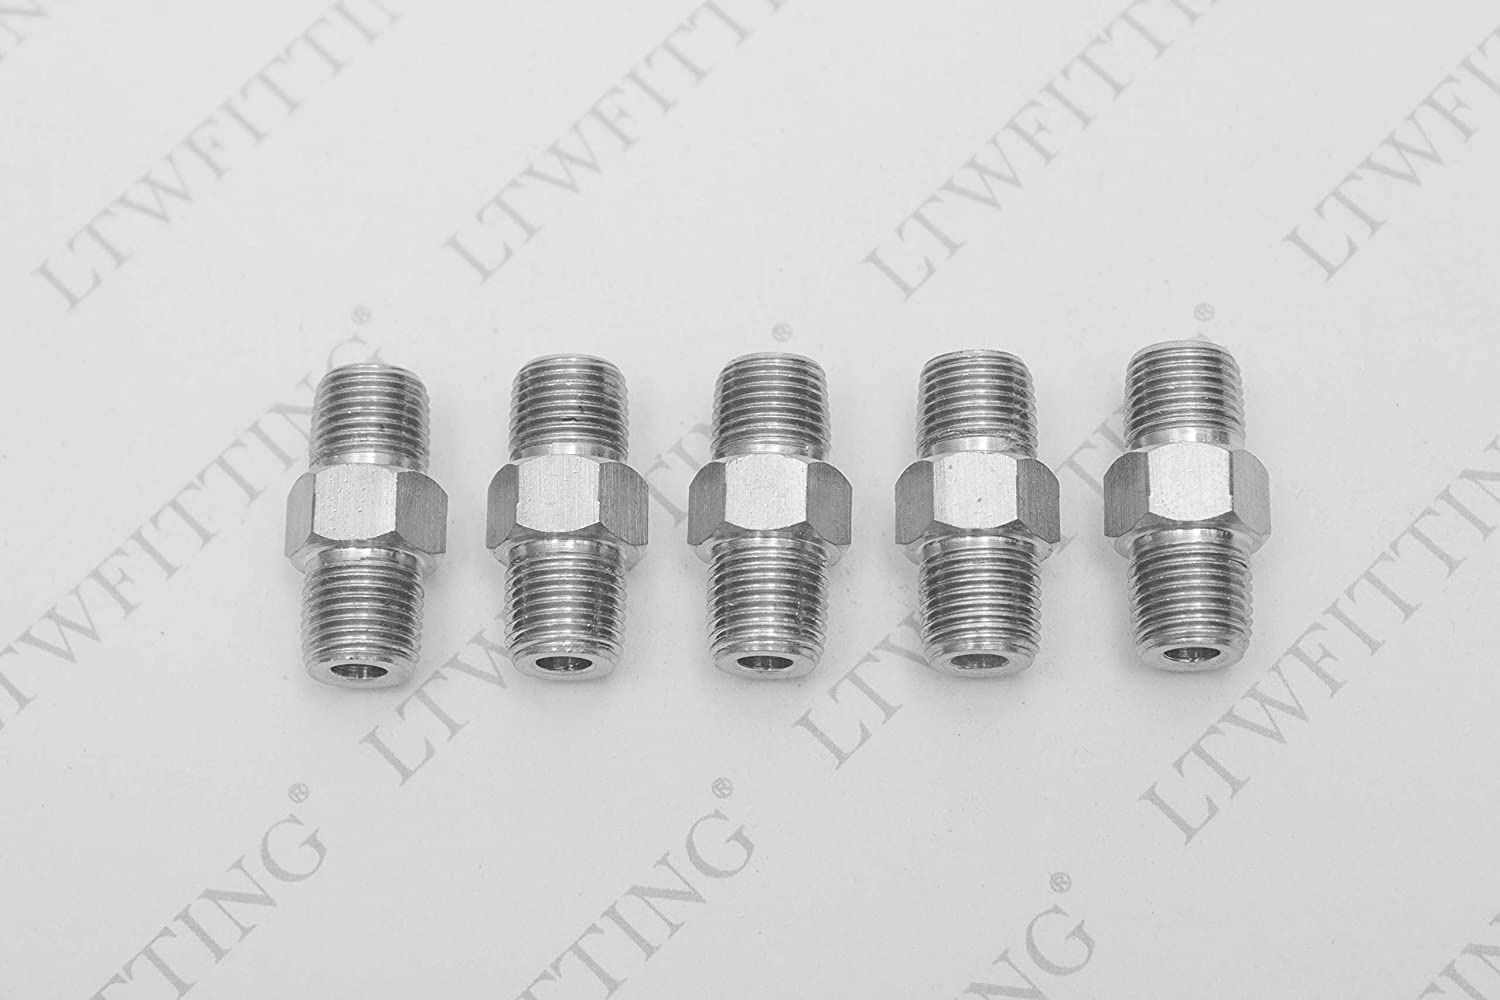 LTWFITTING Class 3000 Stainless Steel 316 Pipe Hex Nipple Fitting 1/8 Inch Male NPT Air Fuel Water (Pack of 5)